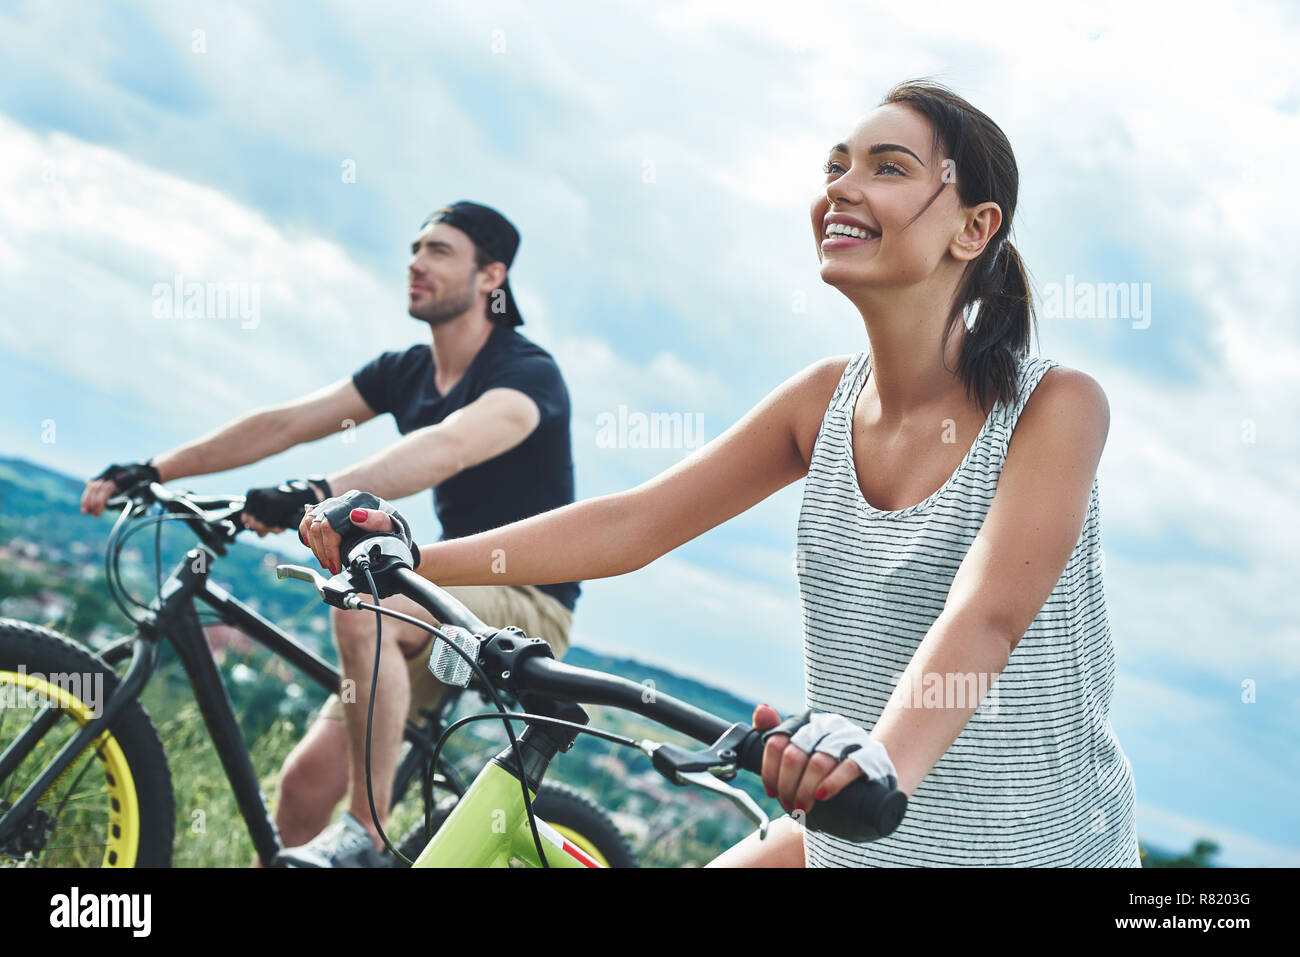 A man and a woman are laughing and cycling. Close up view Stock Photo